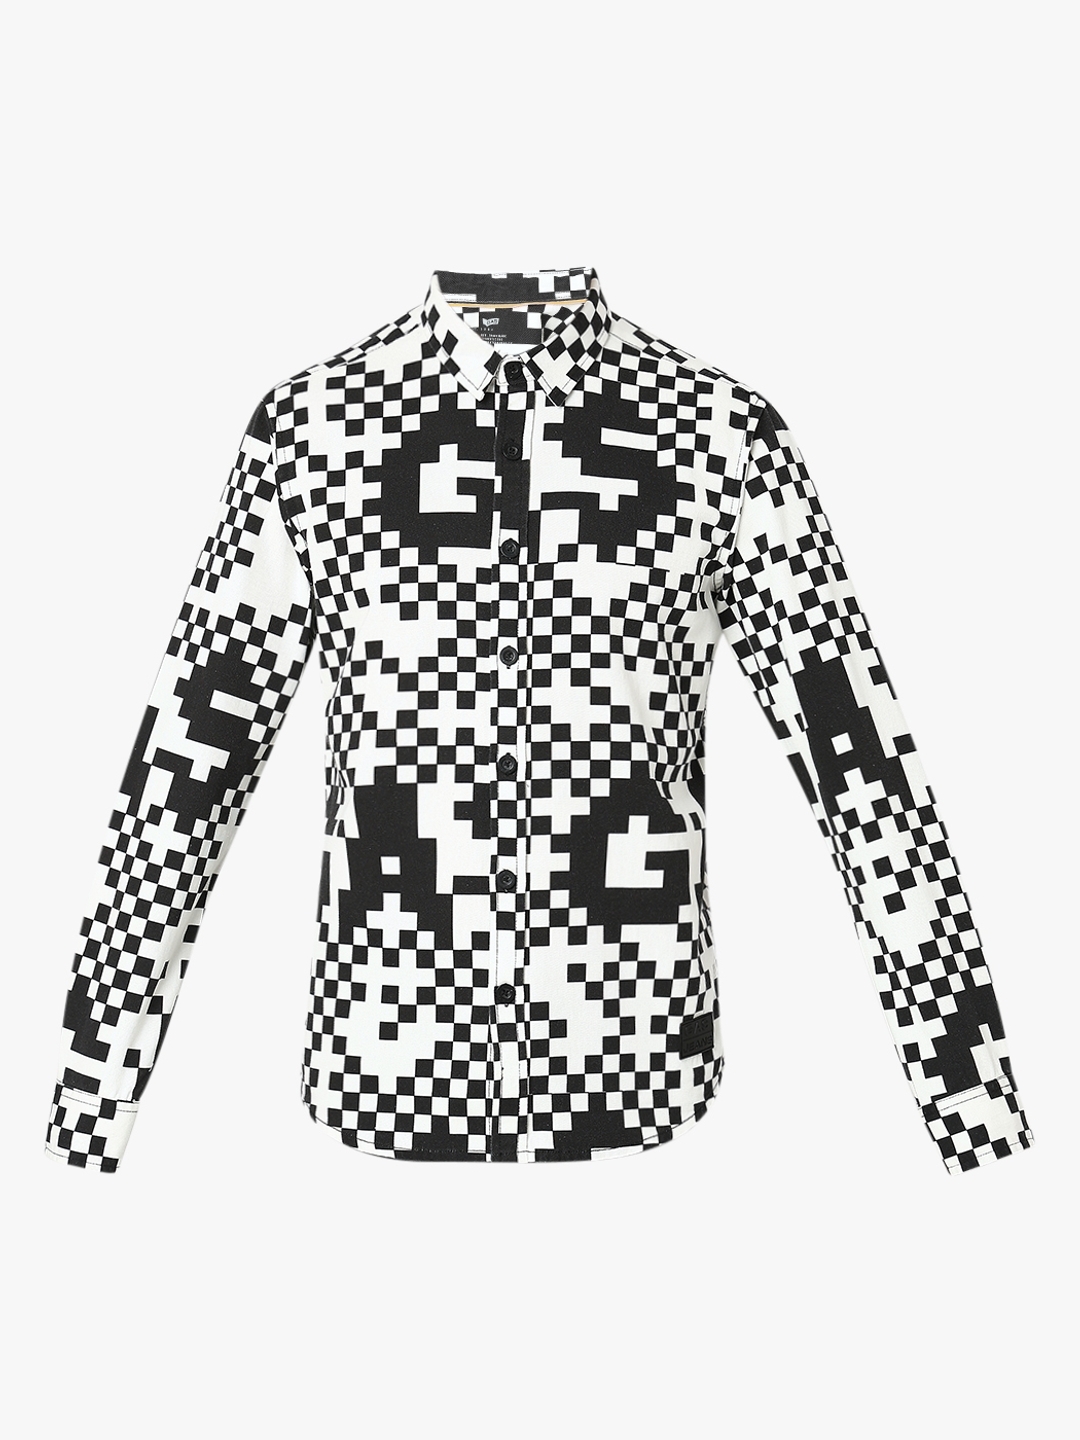 Relaxed Fit Full Sleeve Geometric Cotton Shirts